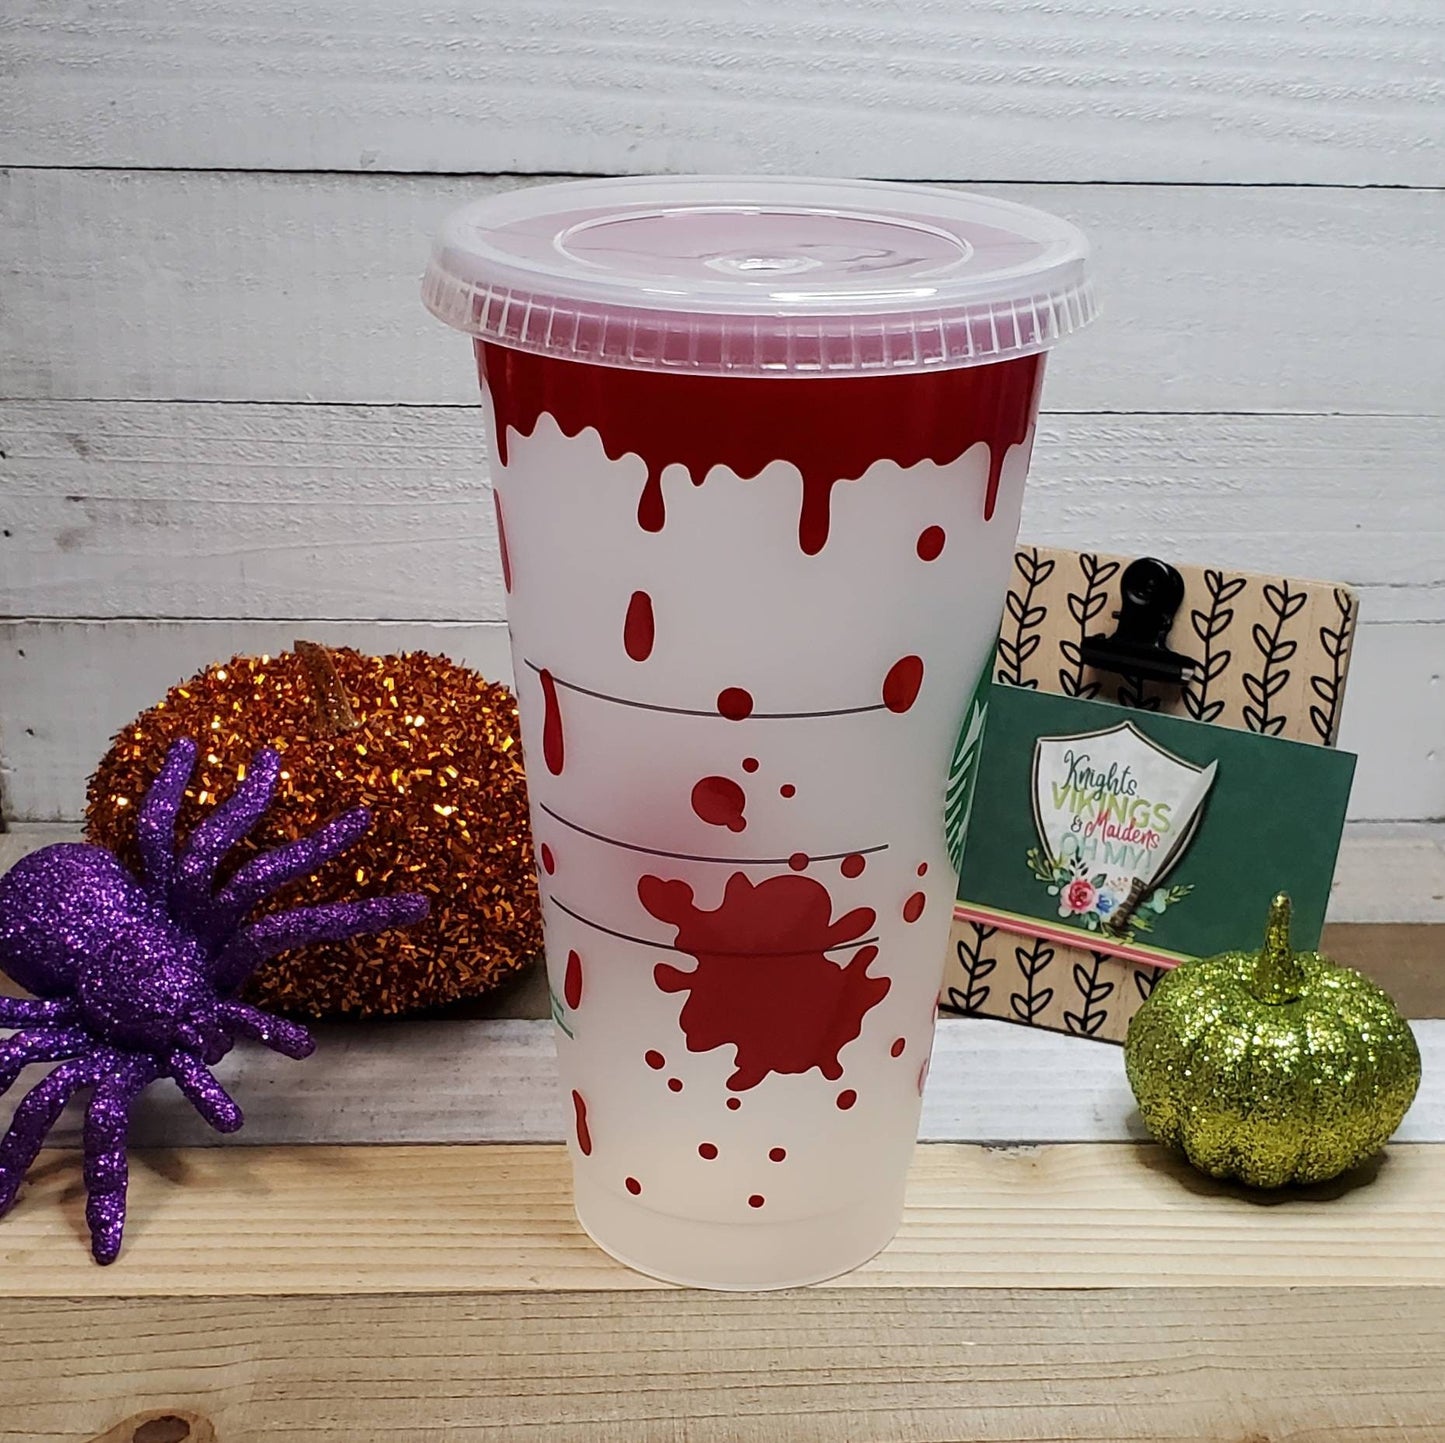 Blood Splatter in Bright Red, Starbucks Cold Cup with Straw